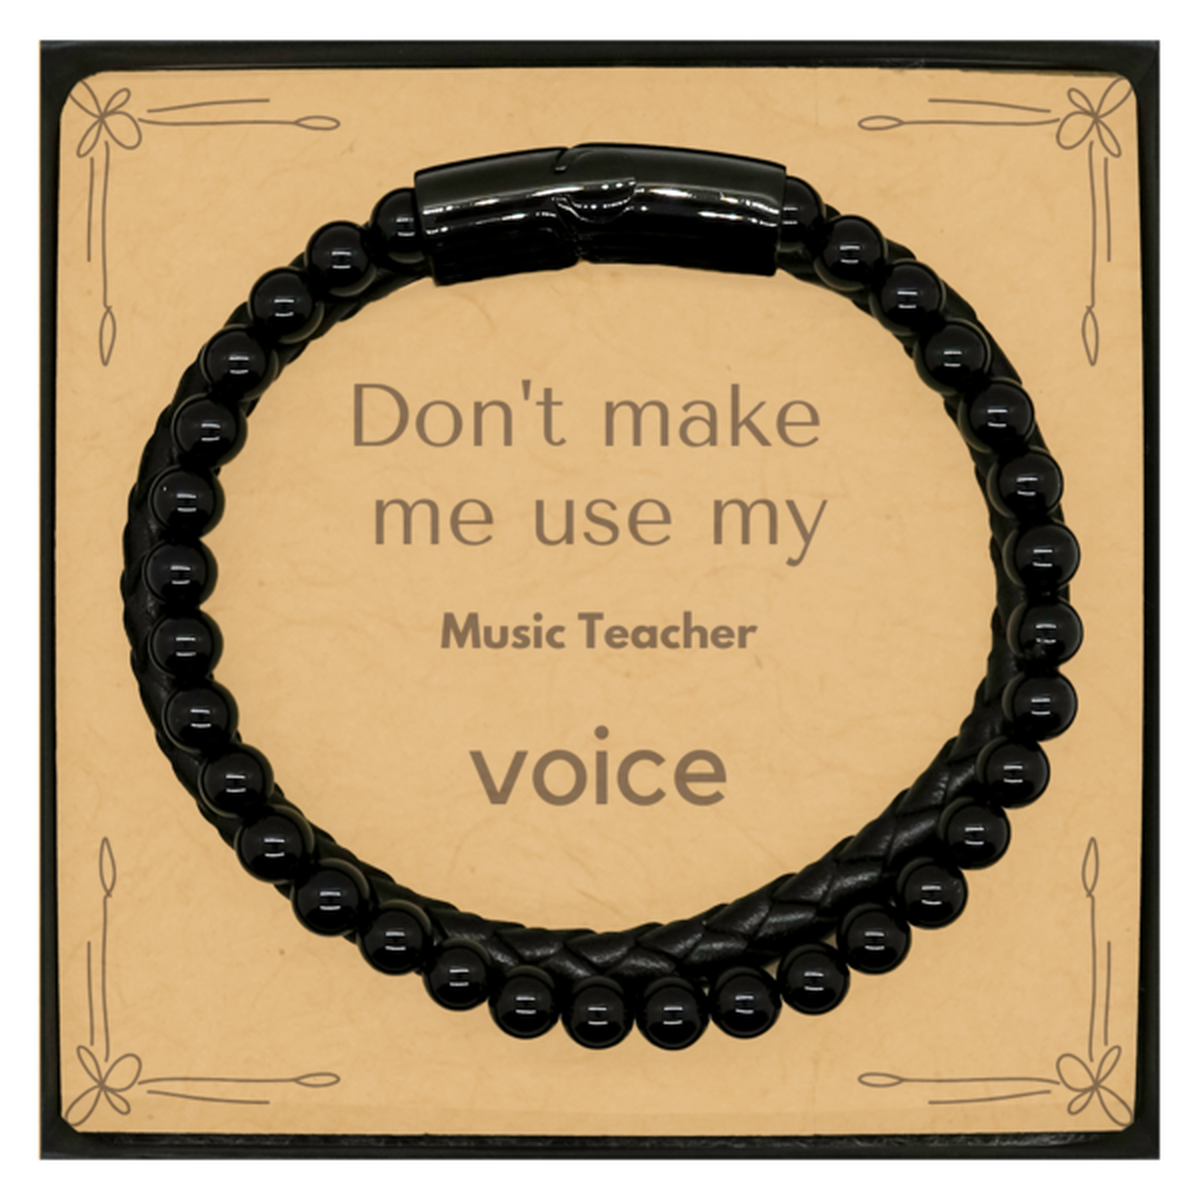 Don't make me use my Music Teacher voice, Sarcasm Music Teacher Card Gifts, Christmas Music Teacher Stone Leather Bracelets Birthday Unique Gifts For Music Teacher Coworkers, Men, Women, Colleague, Friends